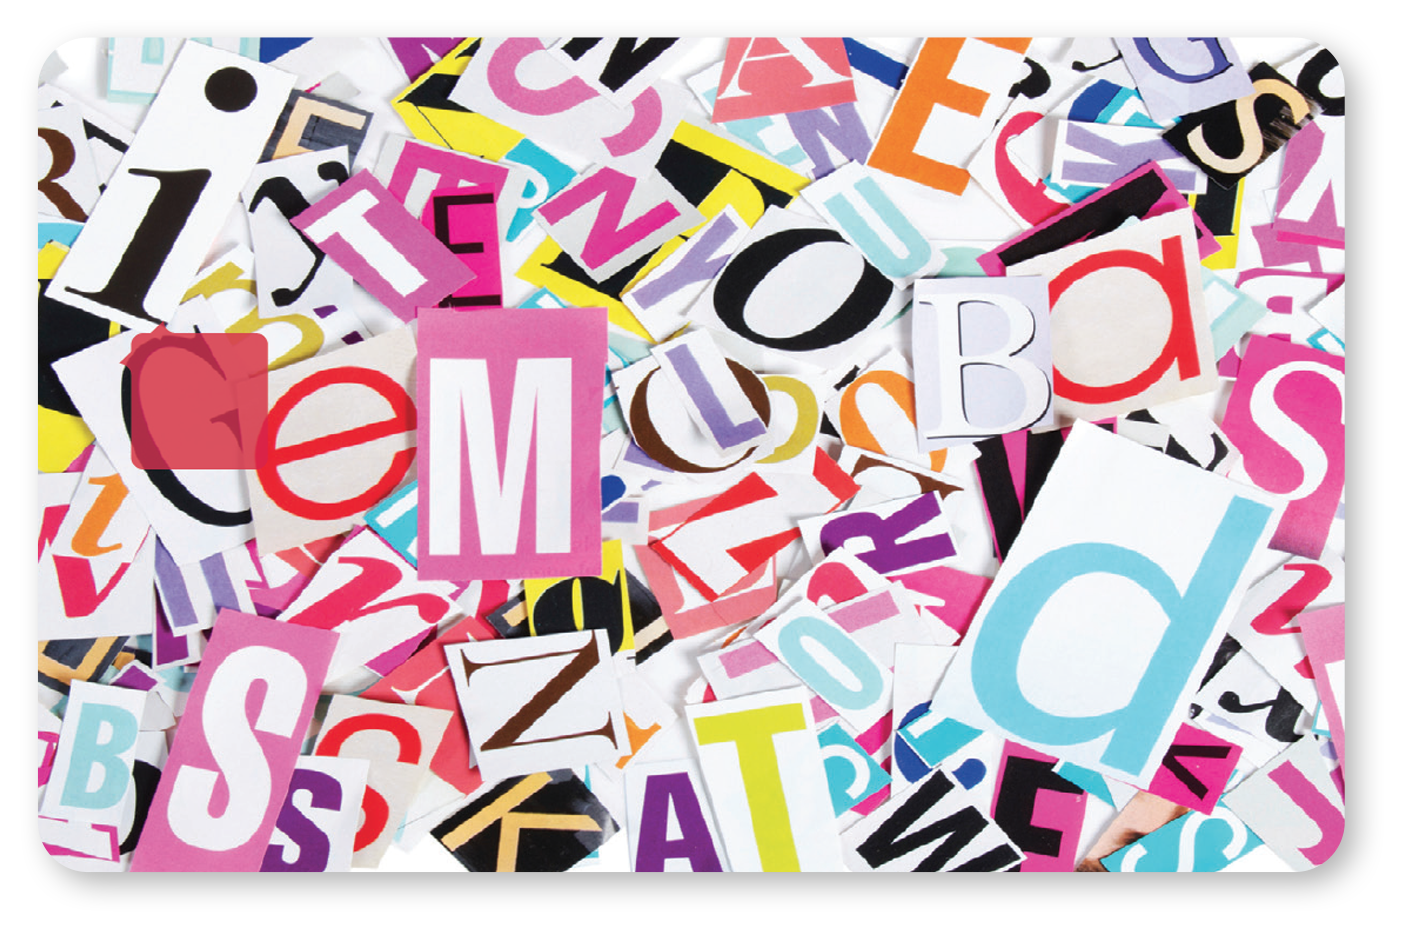 Cutouts of different alphabets from various magzines